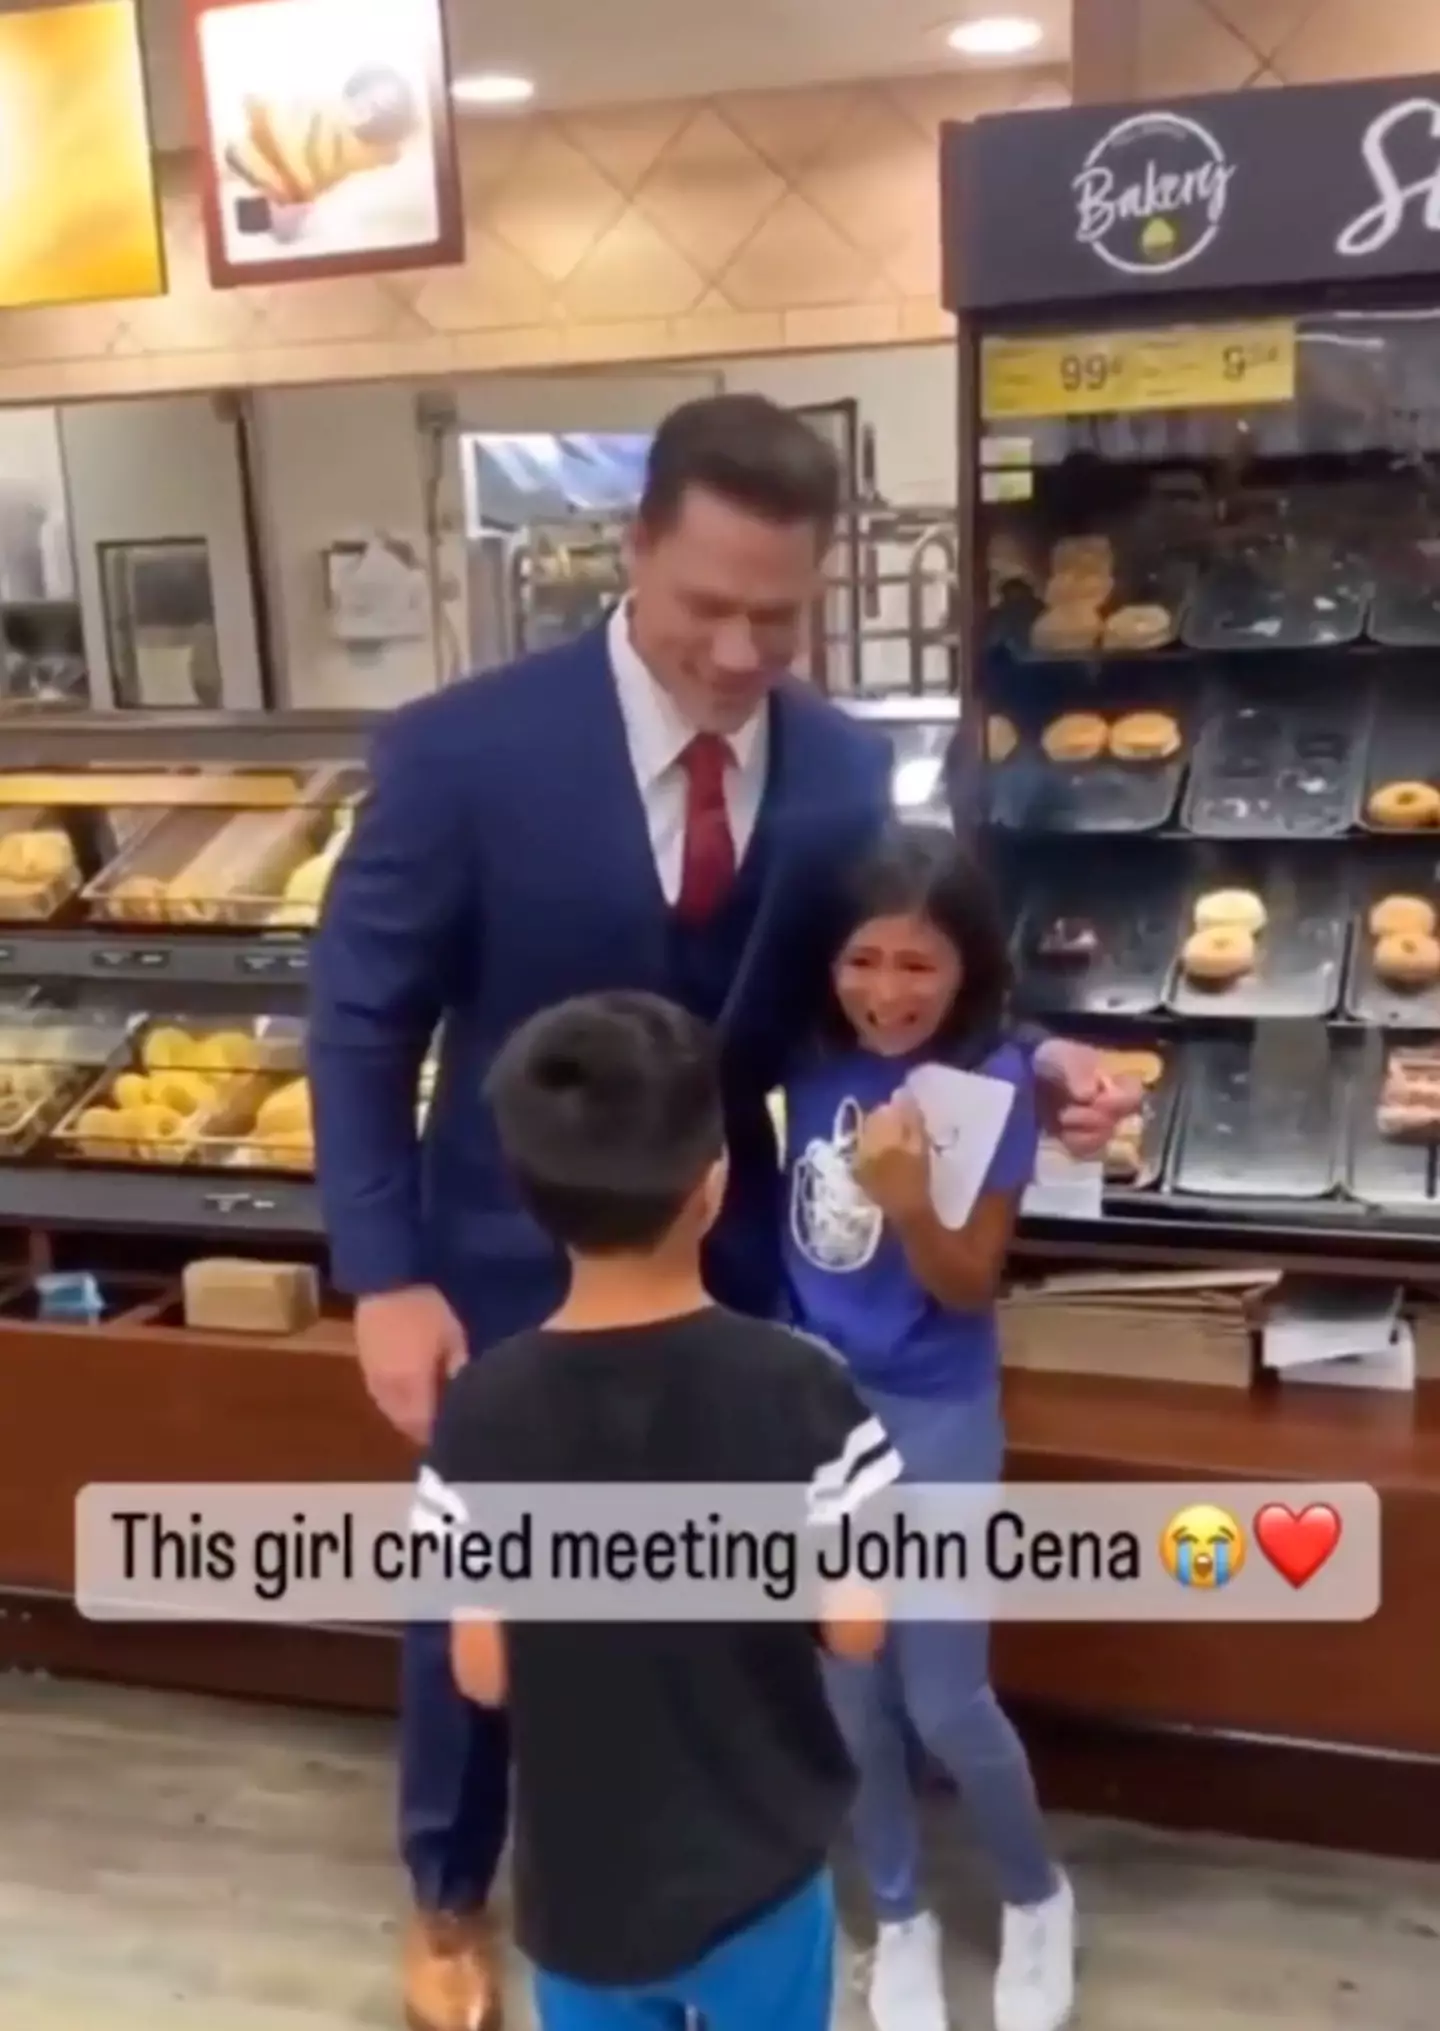 The young John Cena fan said meeting him was a 'dream'.